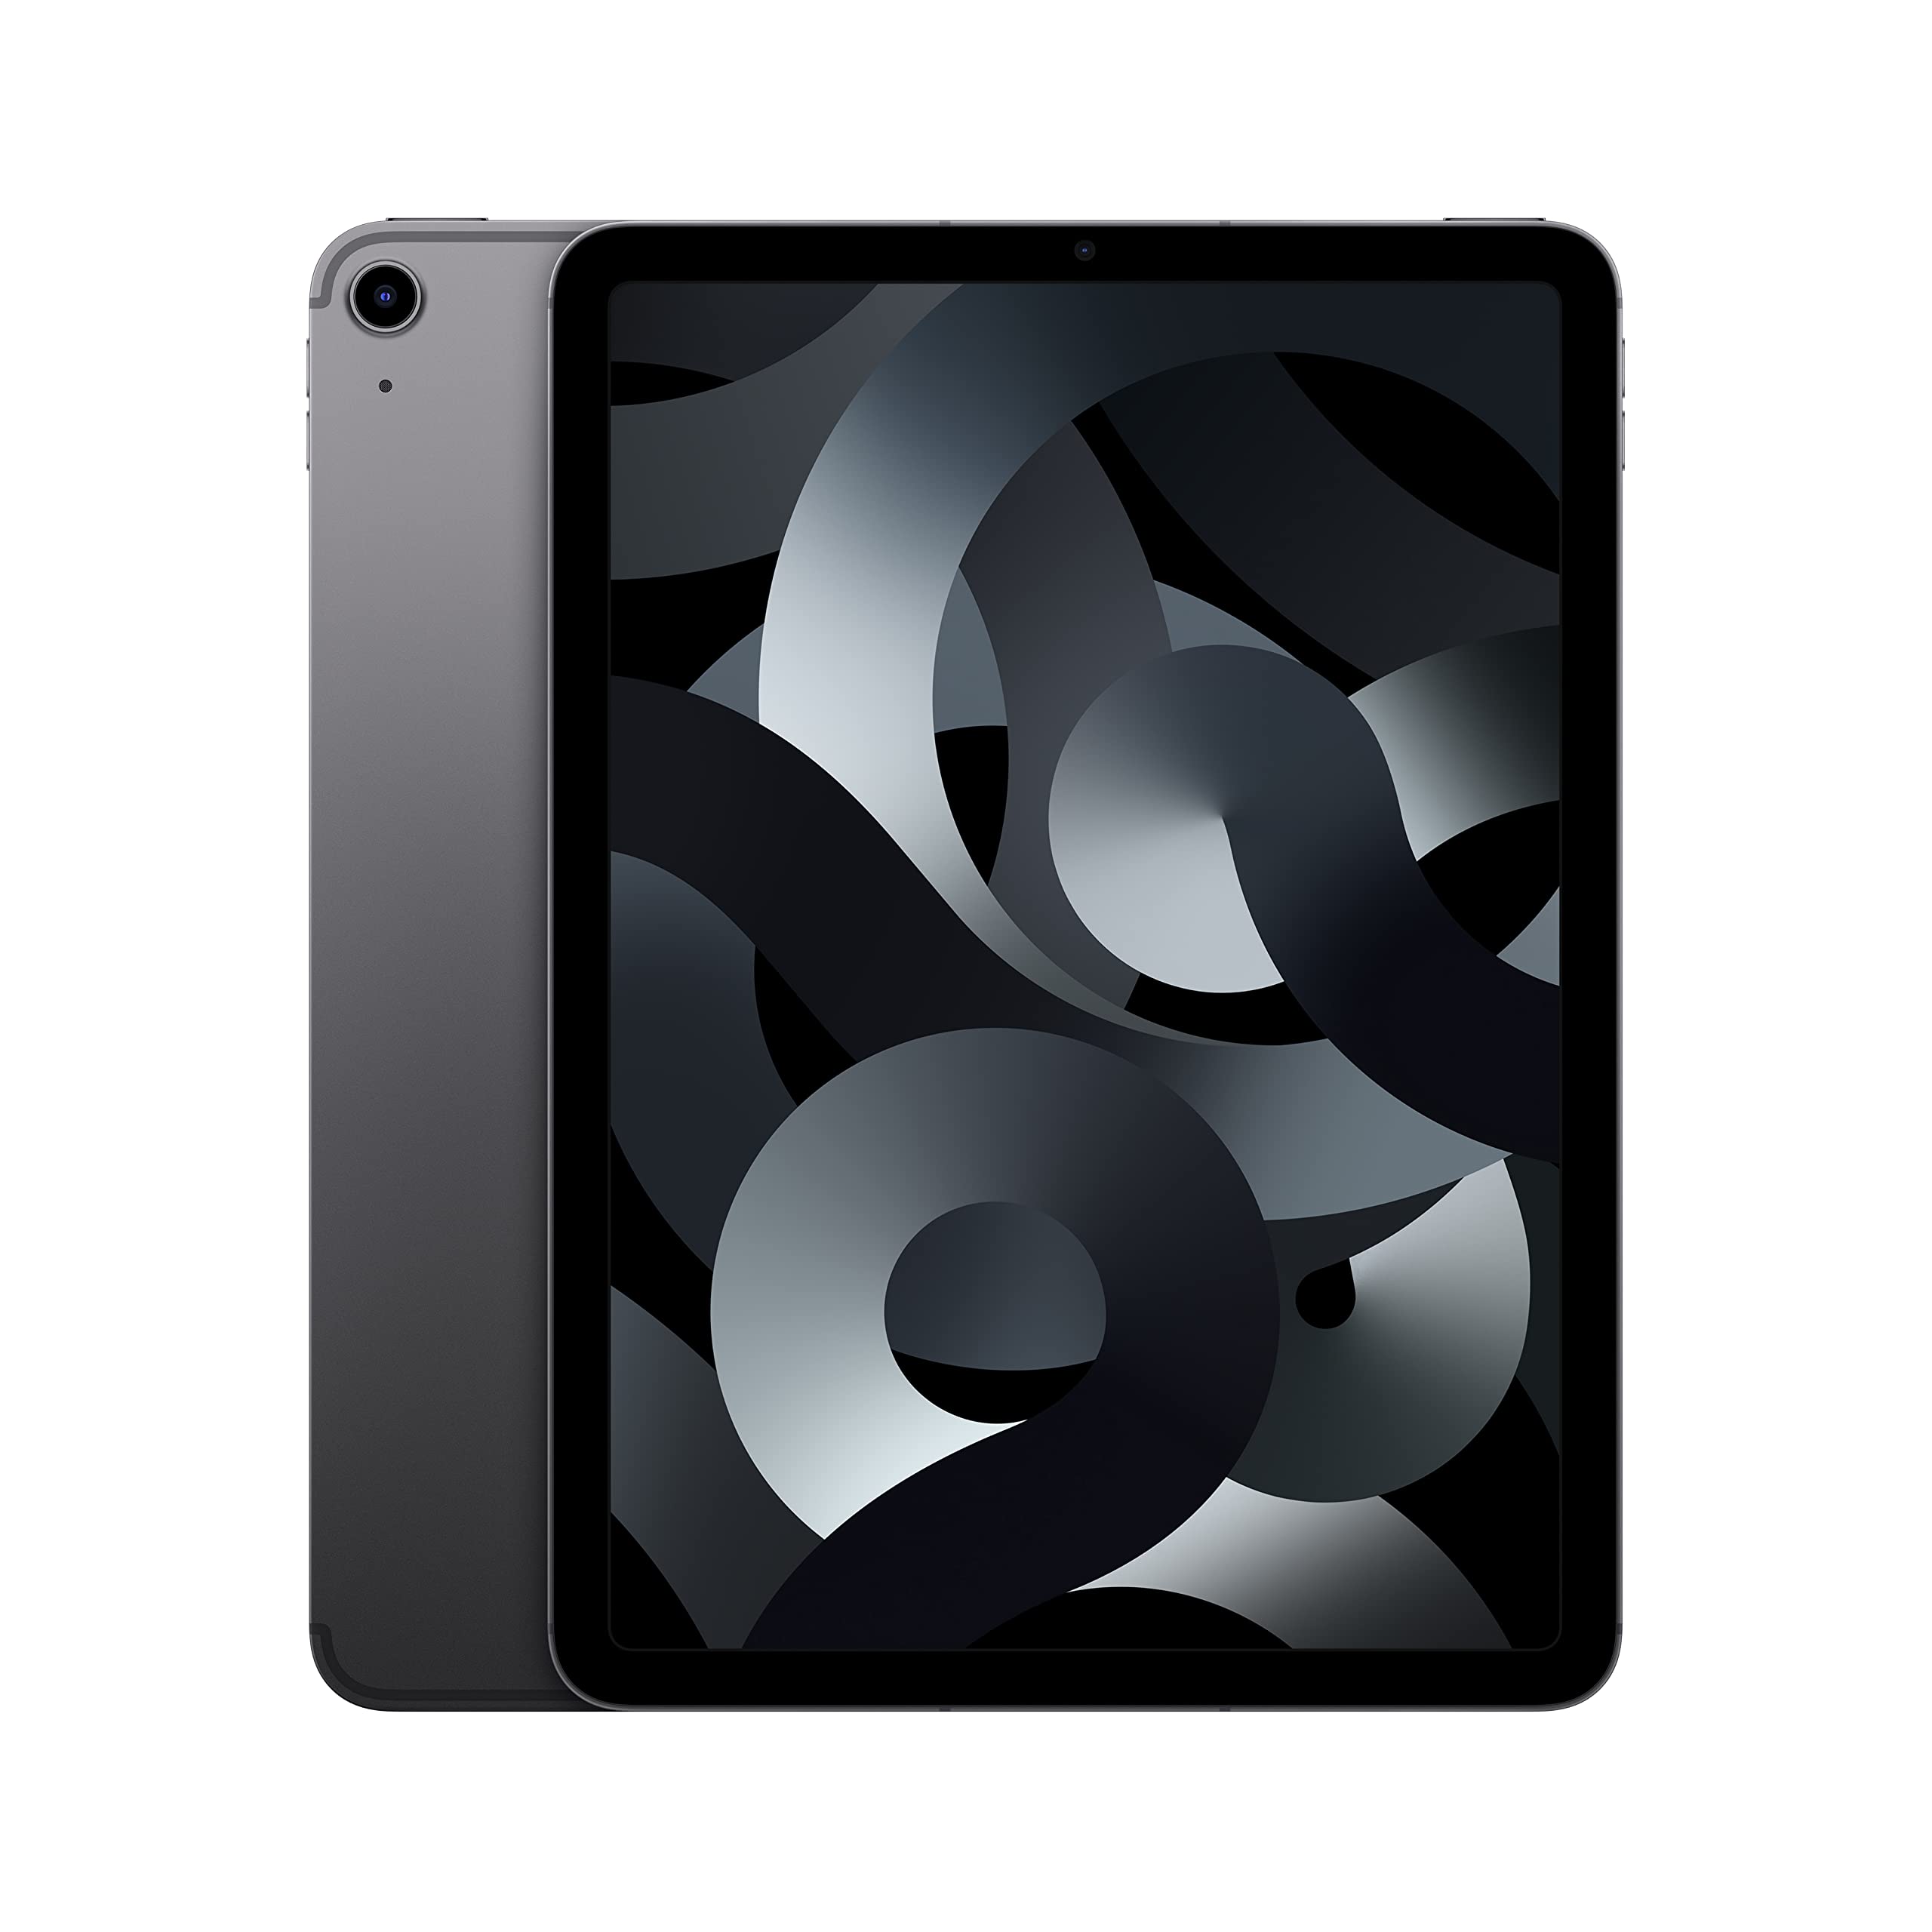 Apple iPad Air (5th Generation): with M1 chip, 10.9-inch Liquid Retina Display, 256GB, Wi-Fi 6 + 5G Cellular, 12MP front/12MP Back Camera, Touch ID, All-Day Battery Life - Space Gray